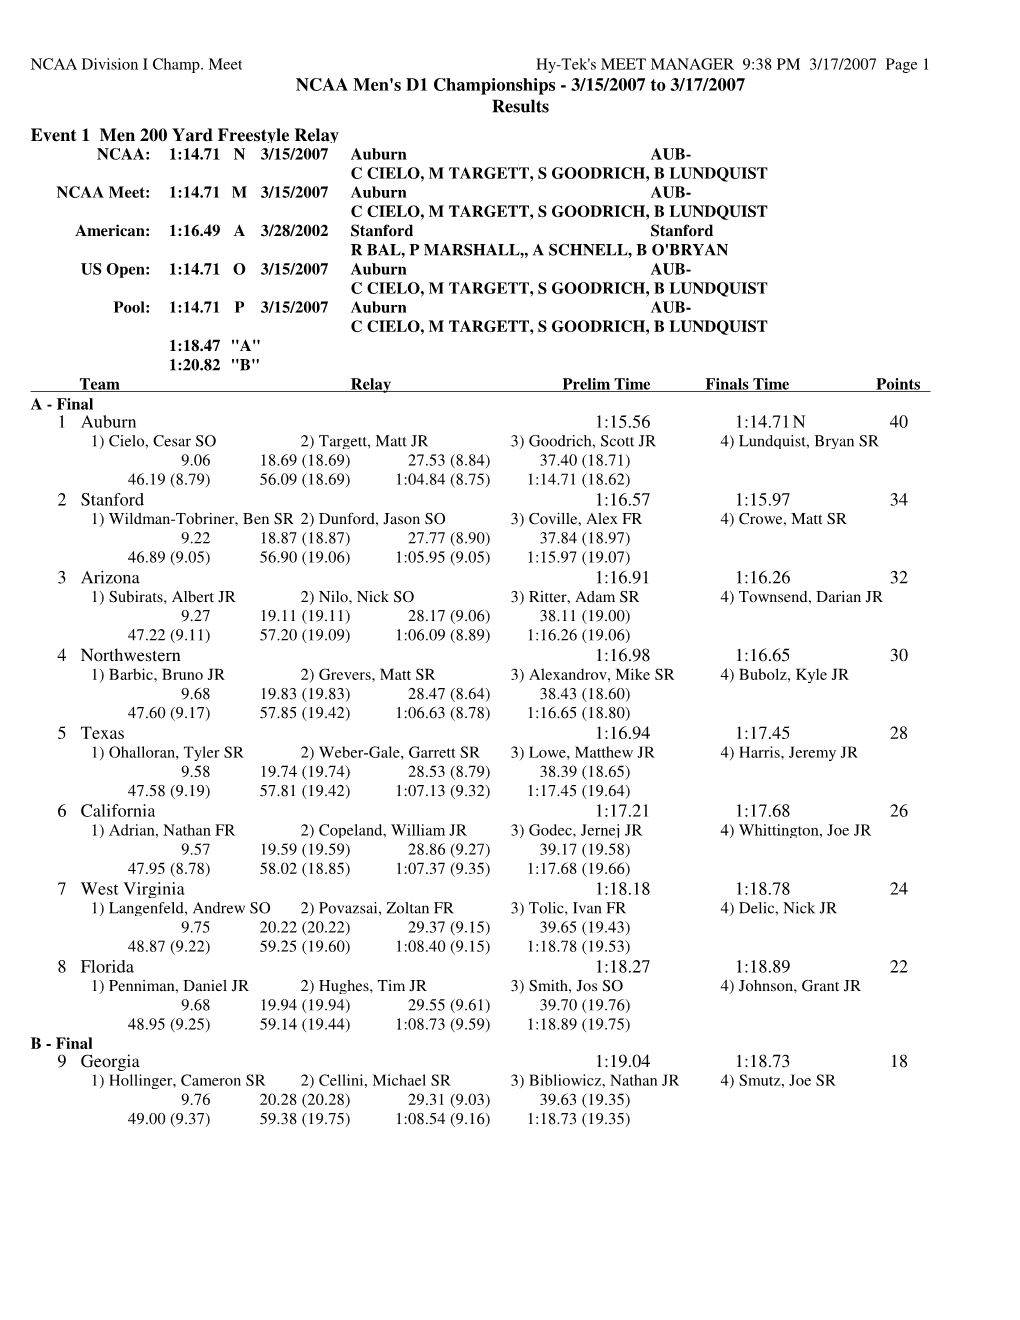 2007 Page 1 NCAA Men's D1 Championships - 3/15/2007 to 3/17/2007 Results